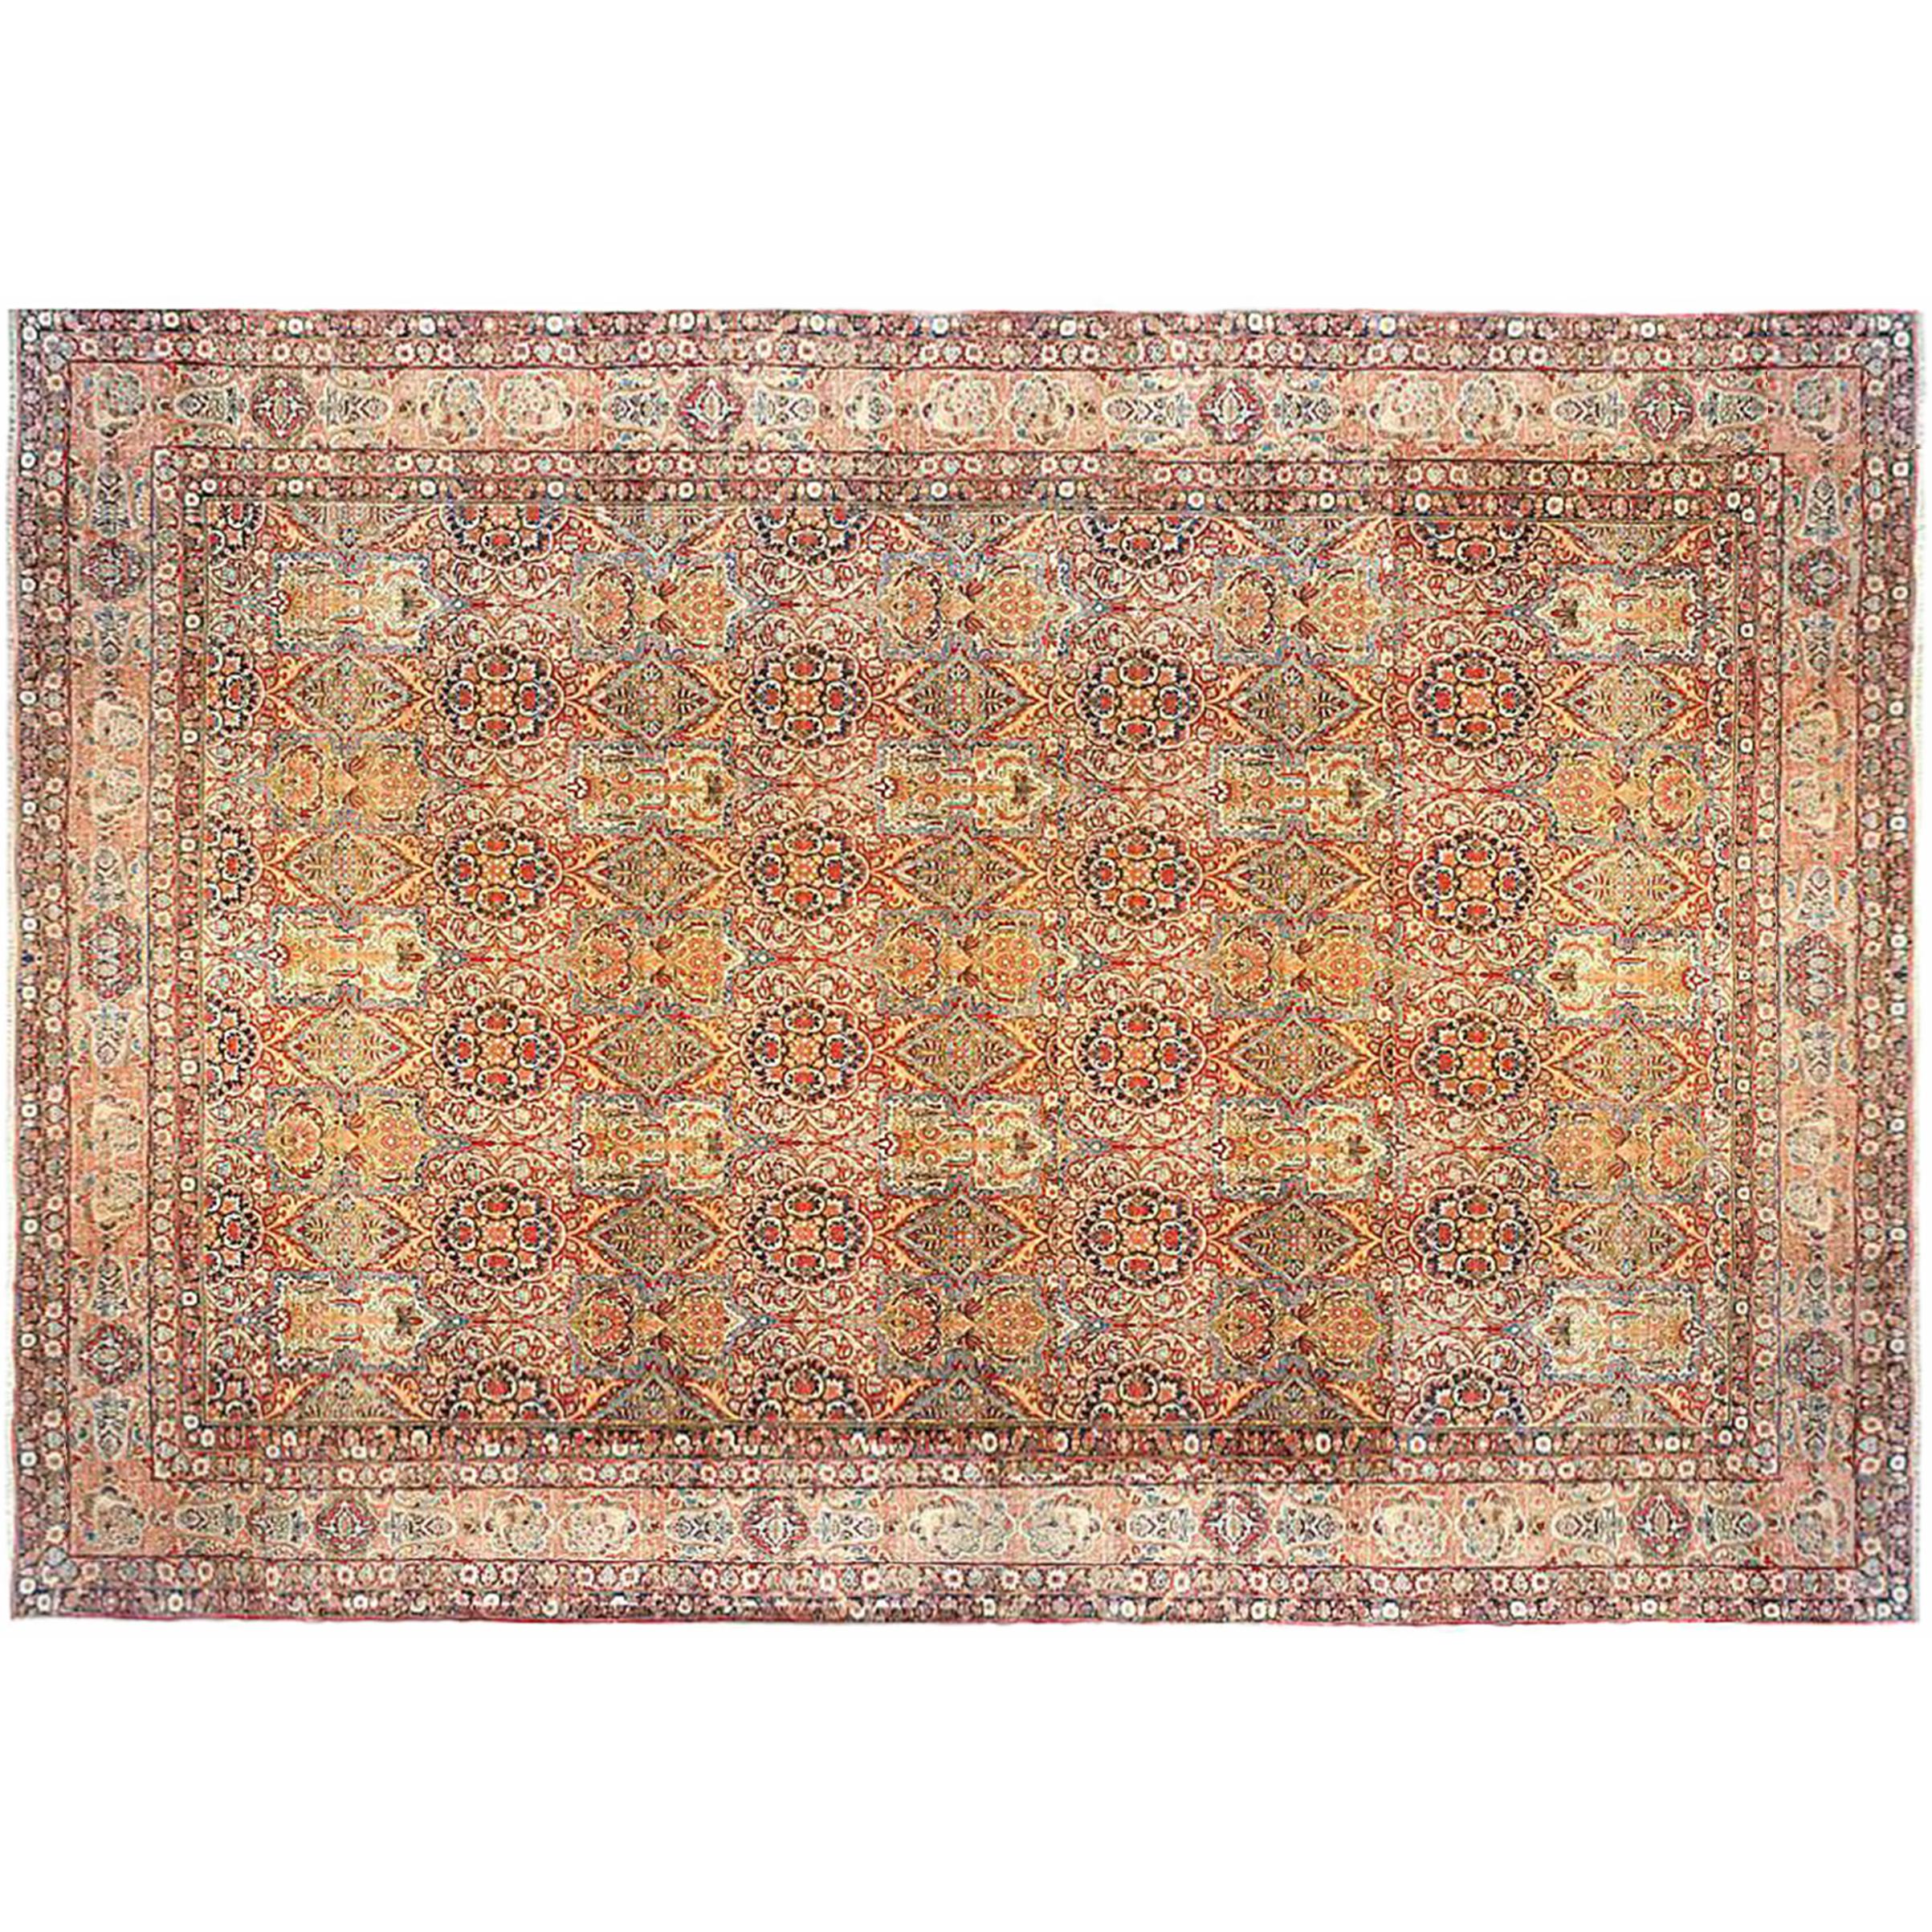 Antique Persian Lavar Oriental Rug, in Mansion Size, with Subdued Colors, c.1890